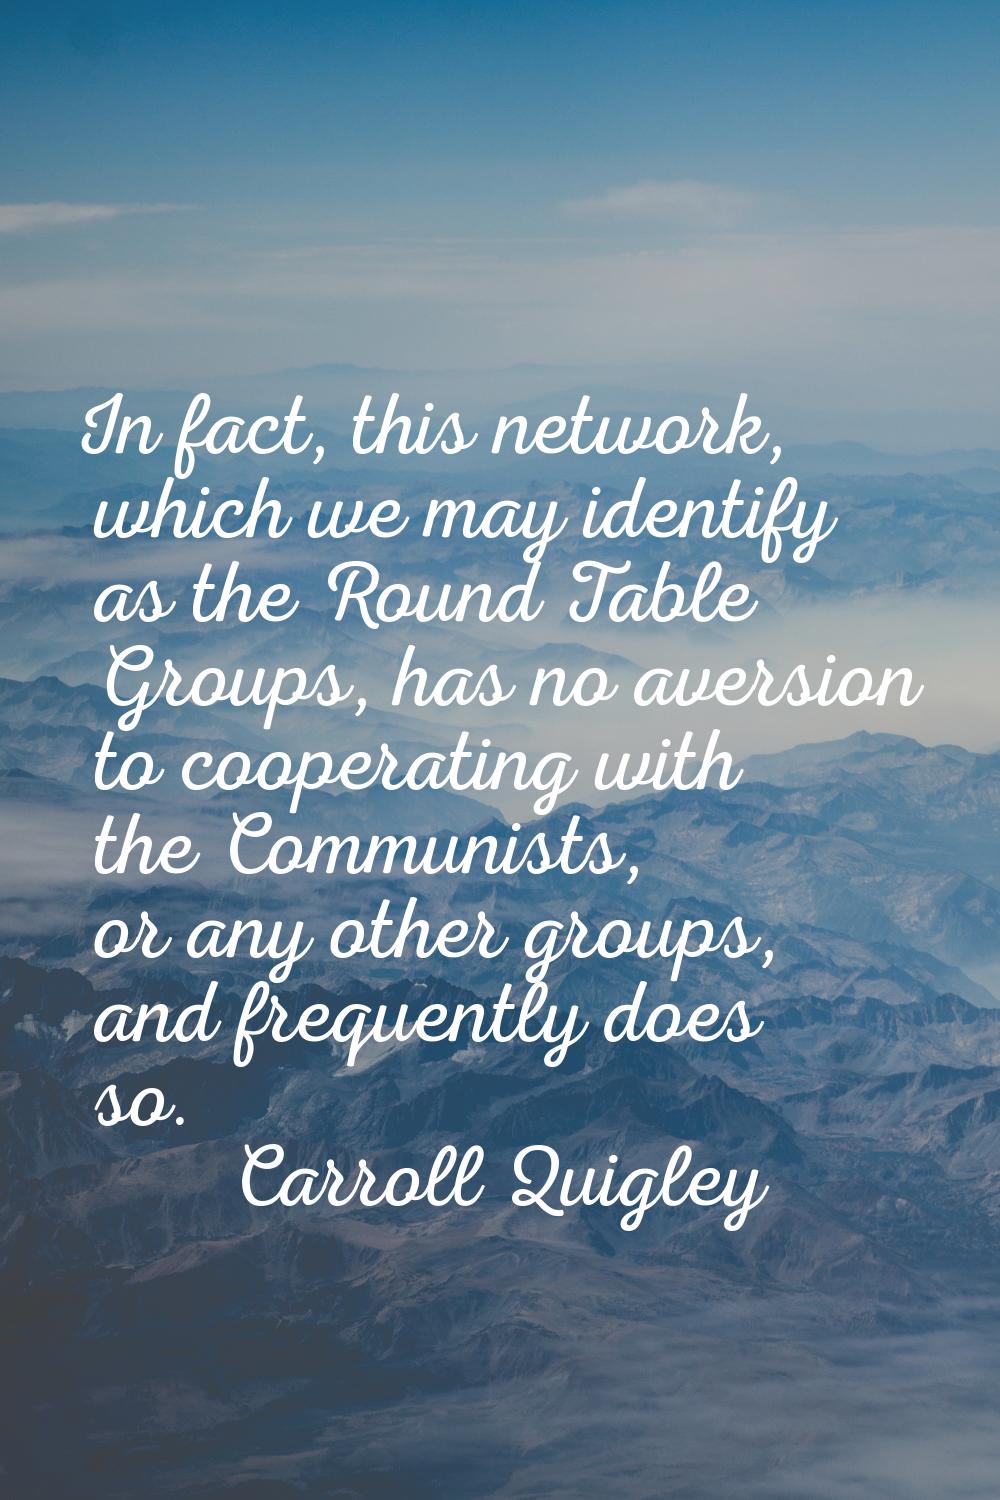 In fact, this network, which we may identify as the Round Table Groups, has no aversion to cooperat